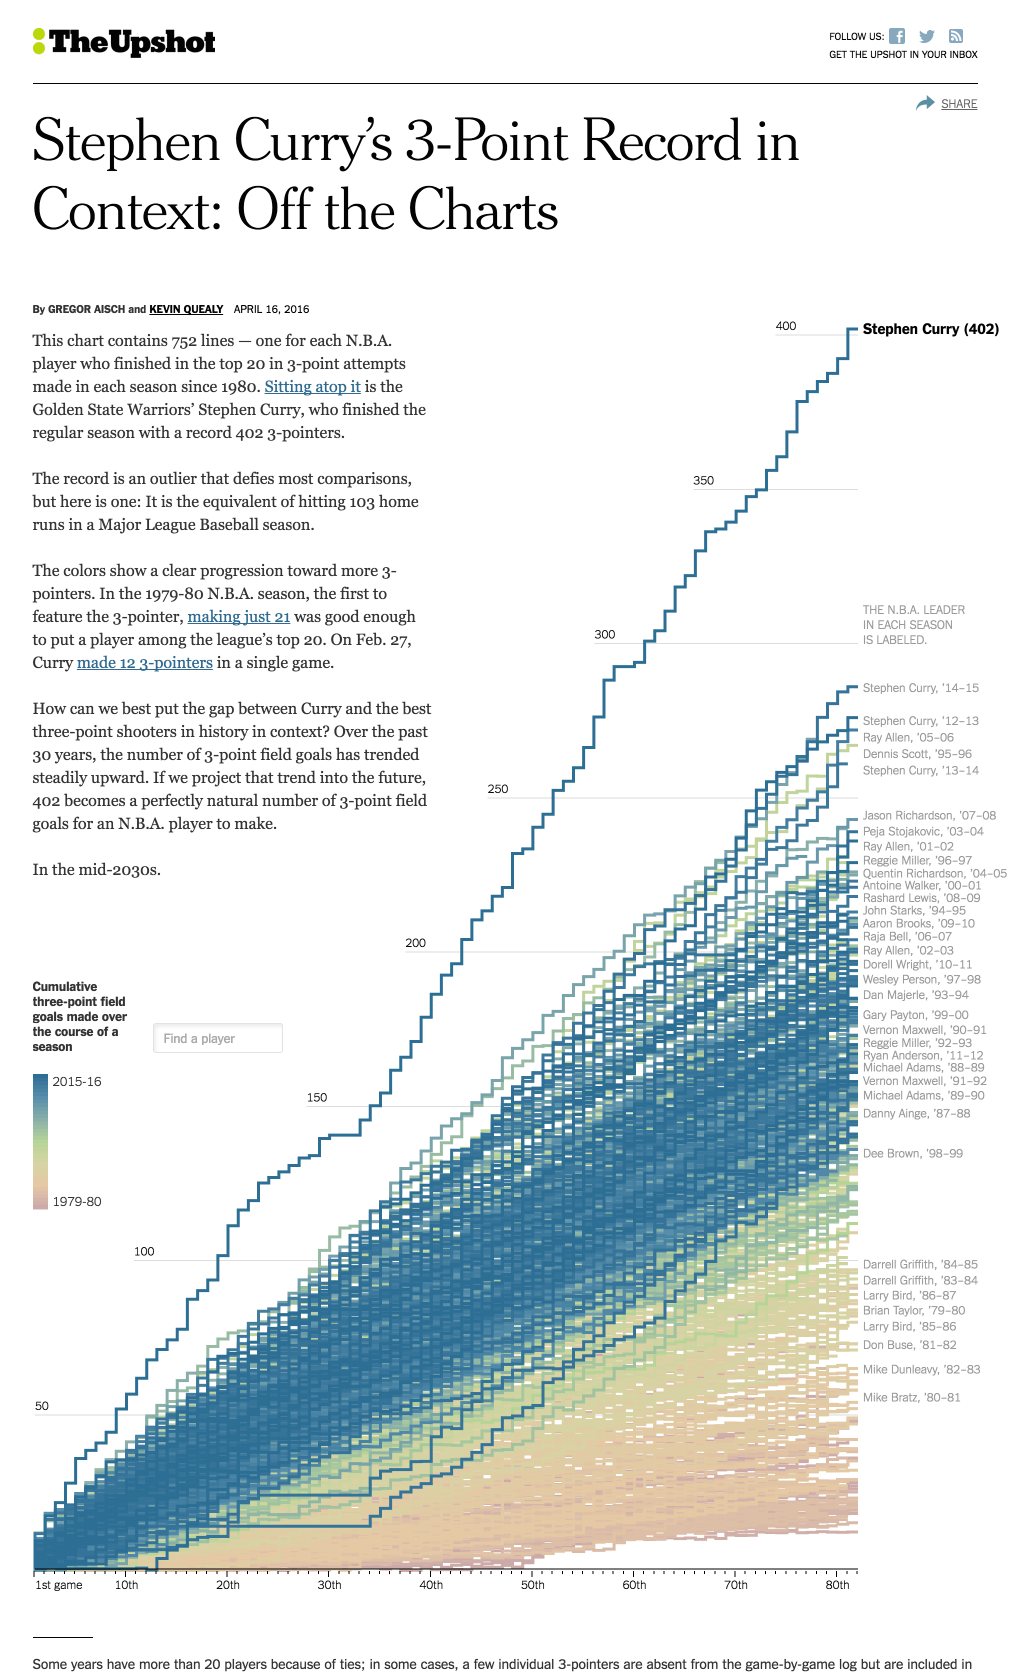 Steph Curry’s 3-Point Record in Context: Off the Charts